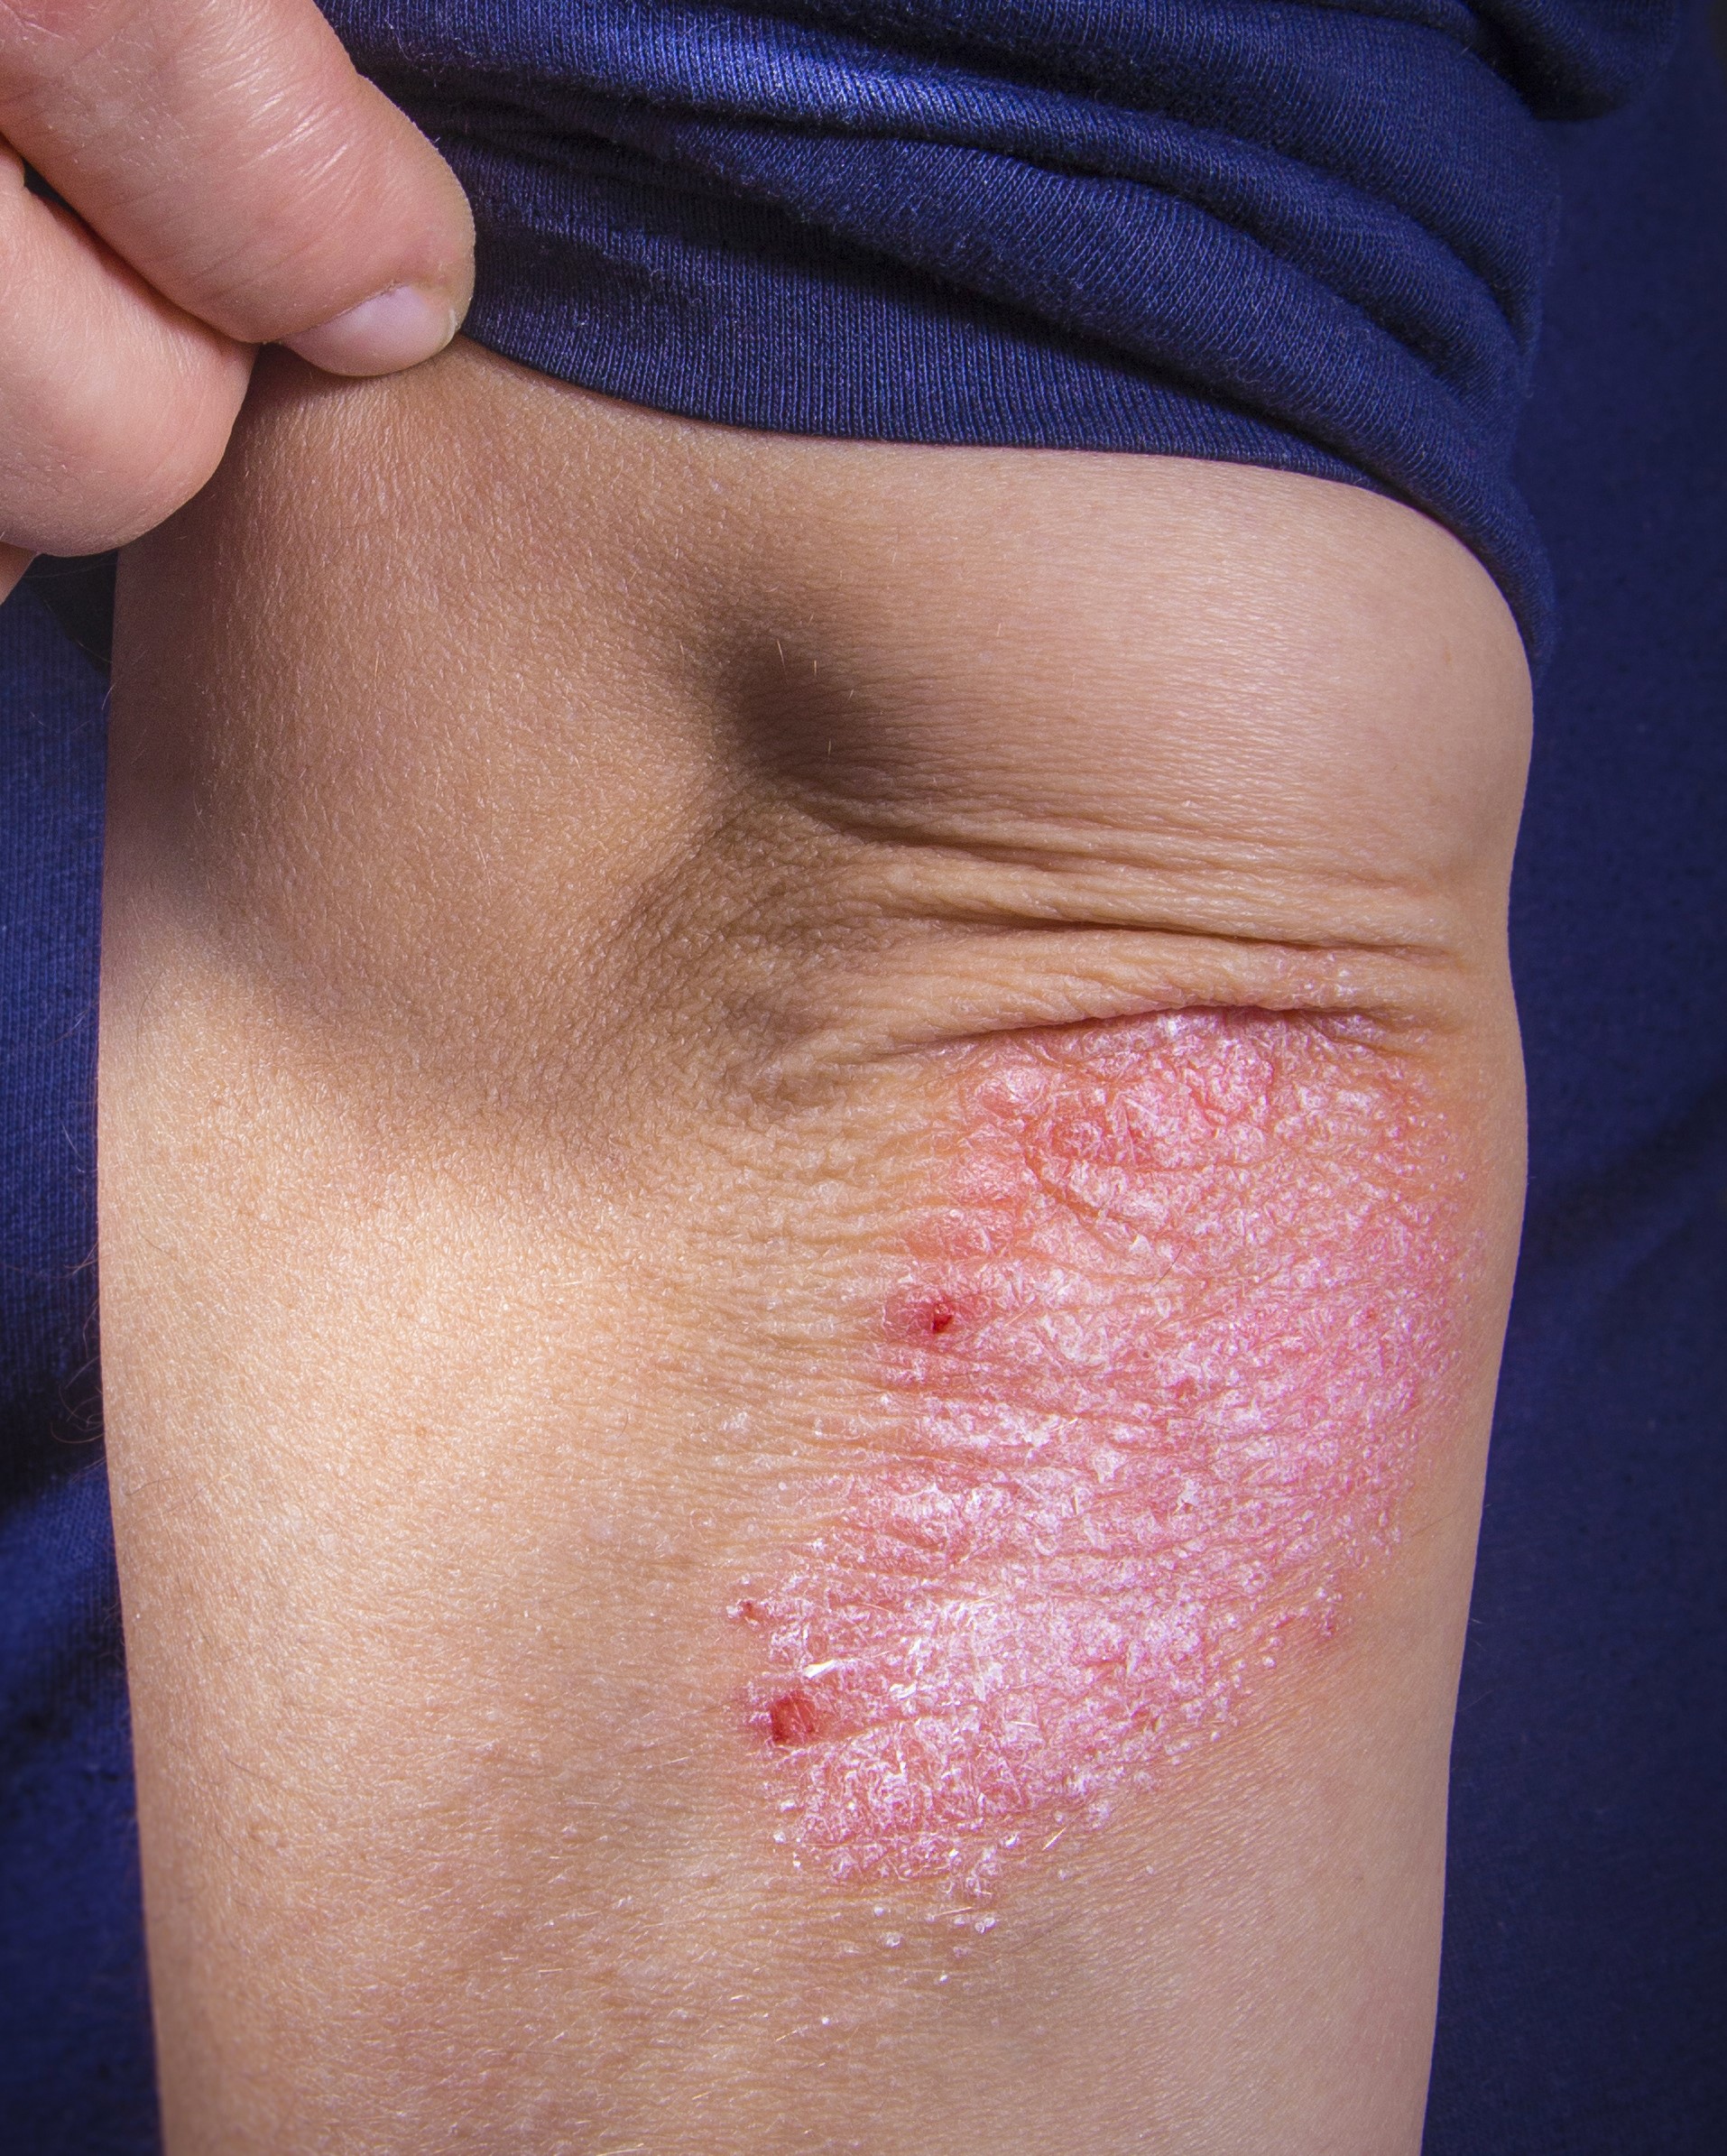 Reddish, inflamed plaques in a psoriasis patient.